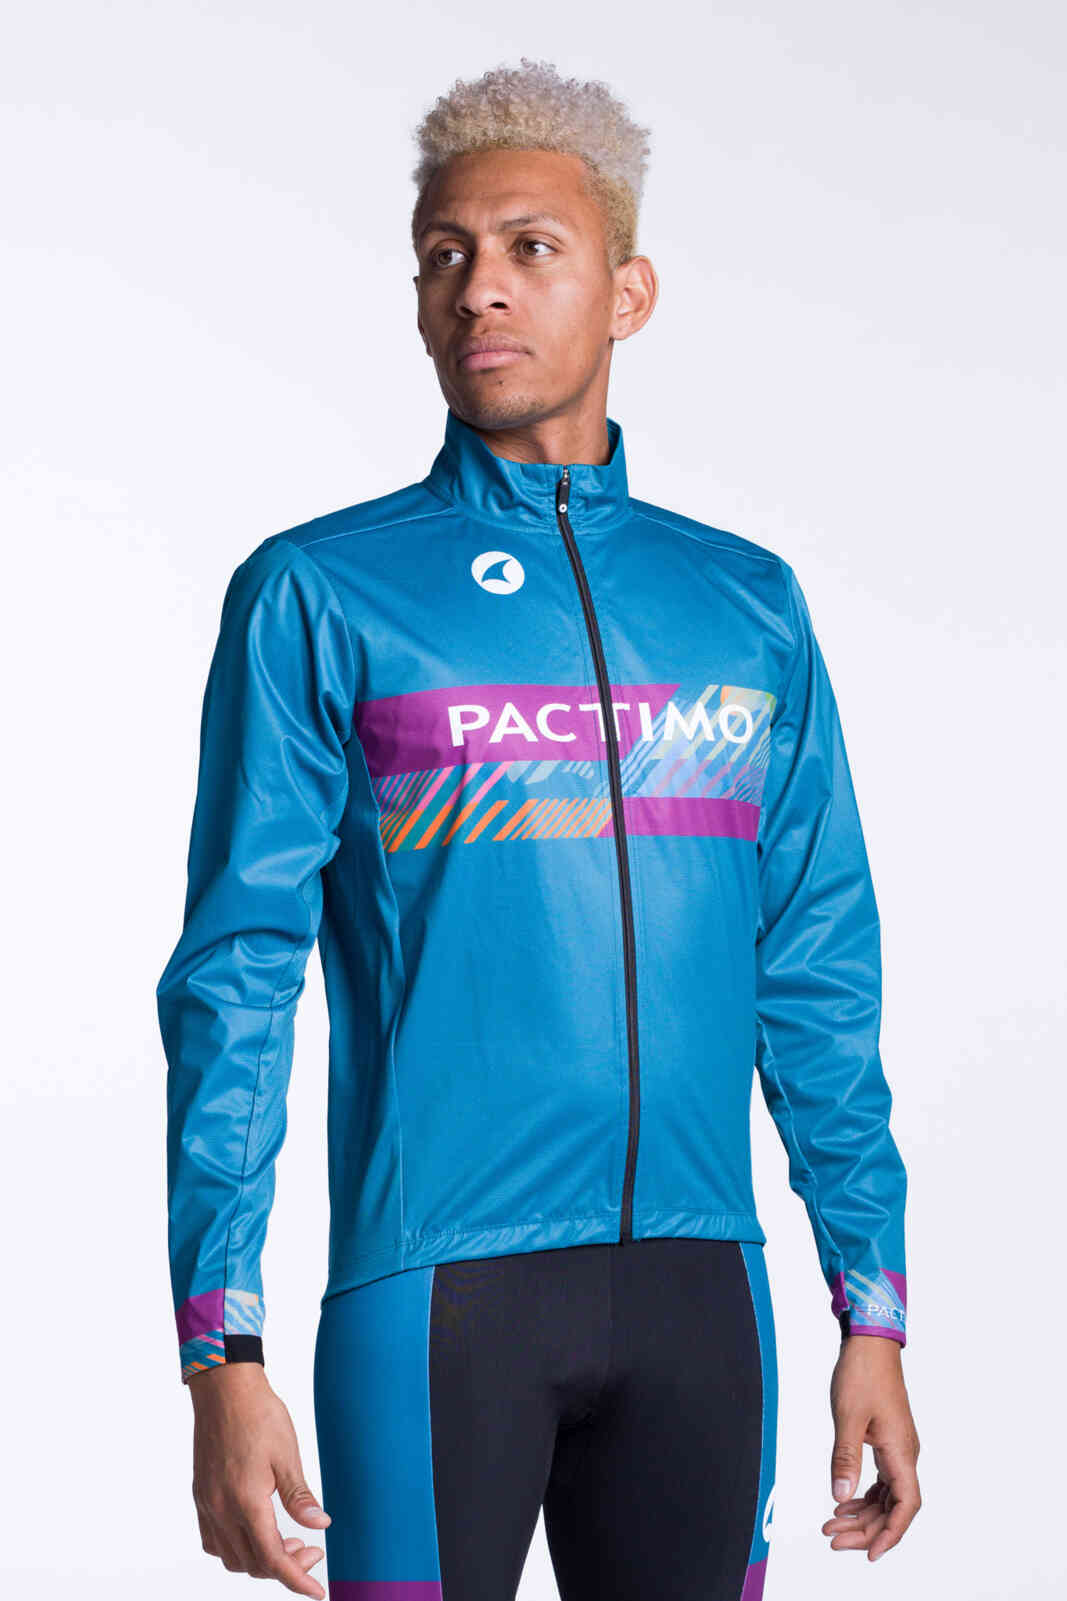 Men's Custom Cycling Jacket for Cold Weather - Breckenridge Front View